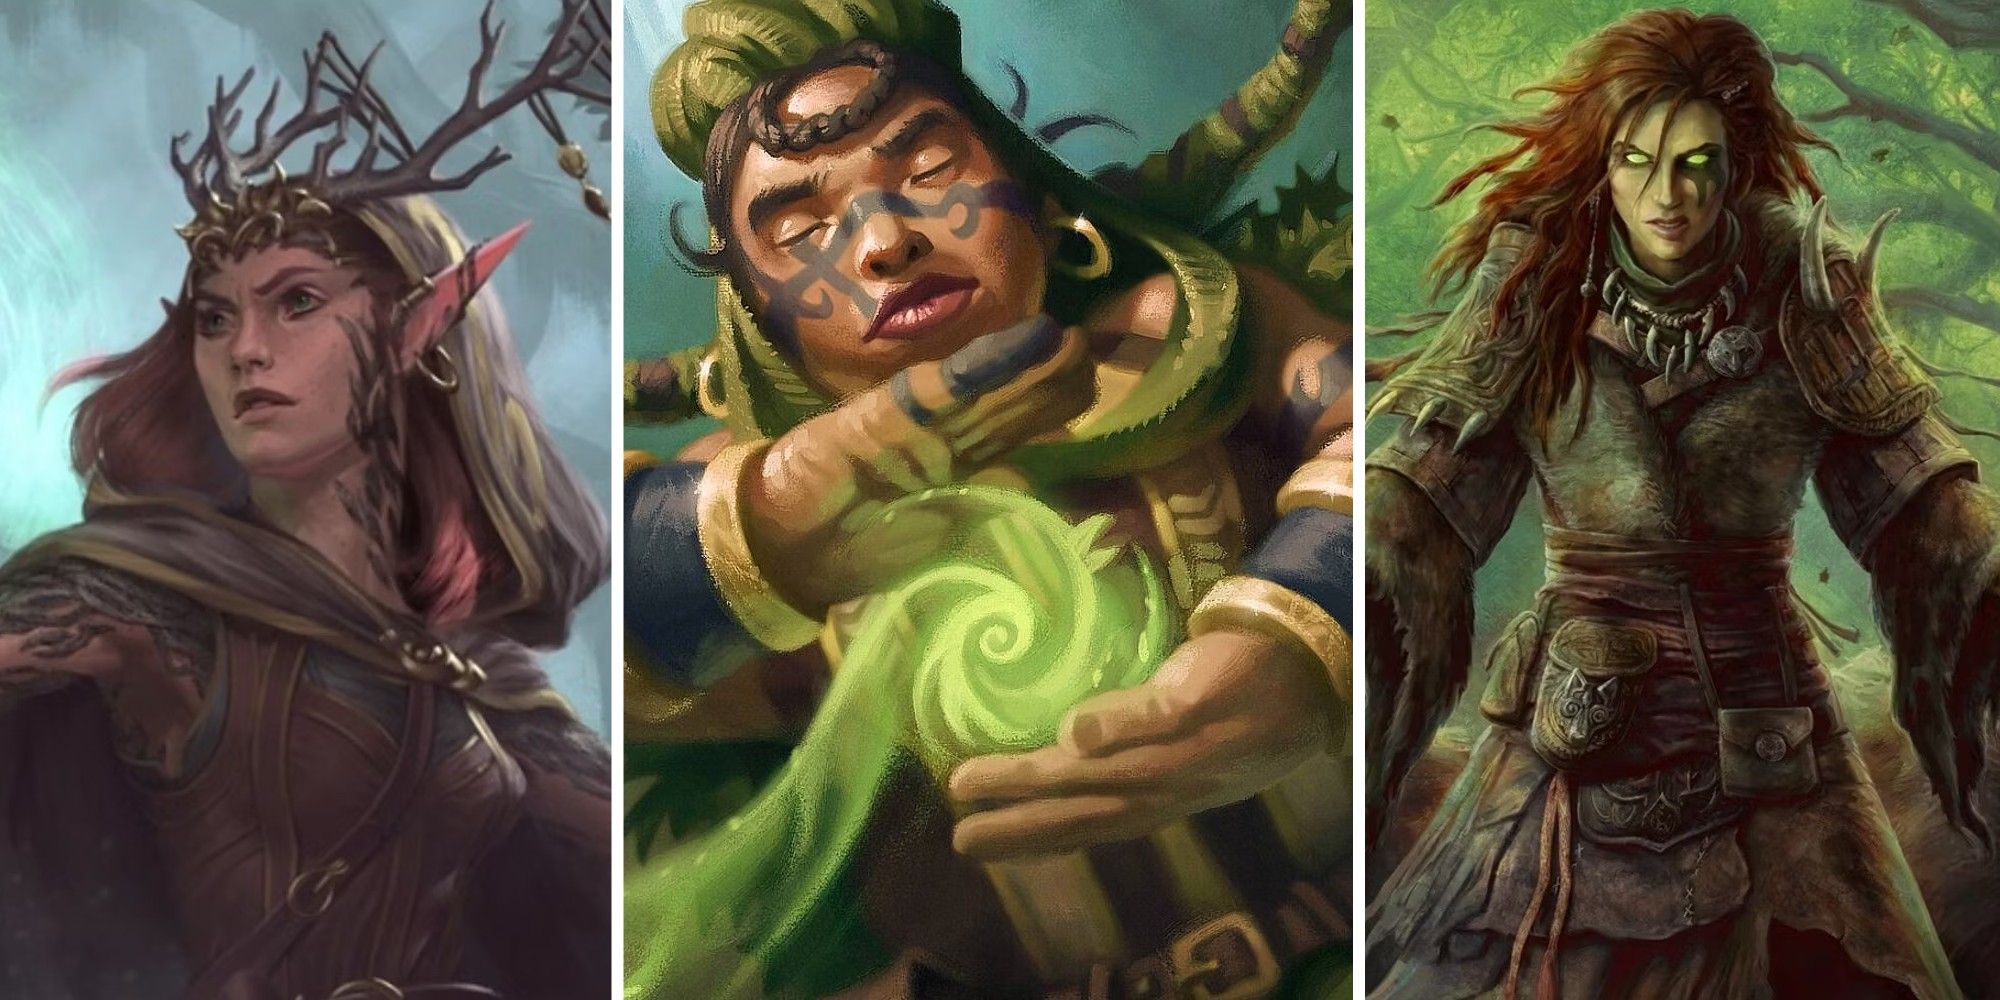 A collage showing three different subclasses from the Druid race.